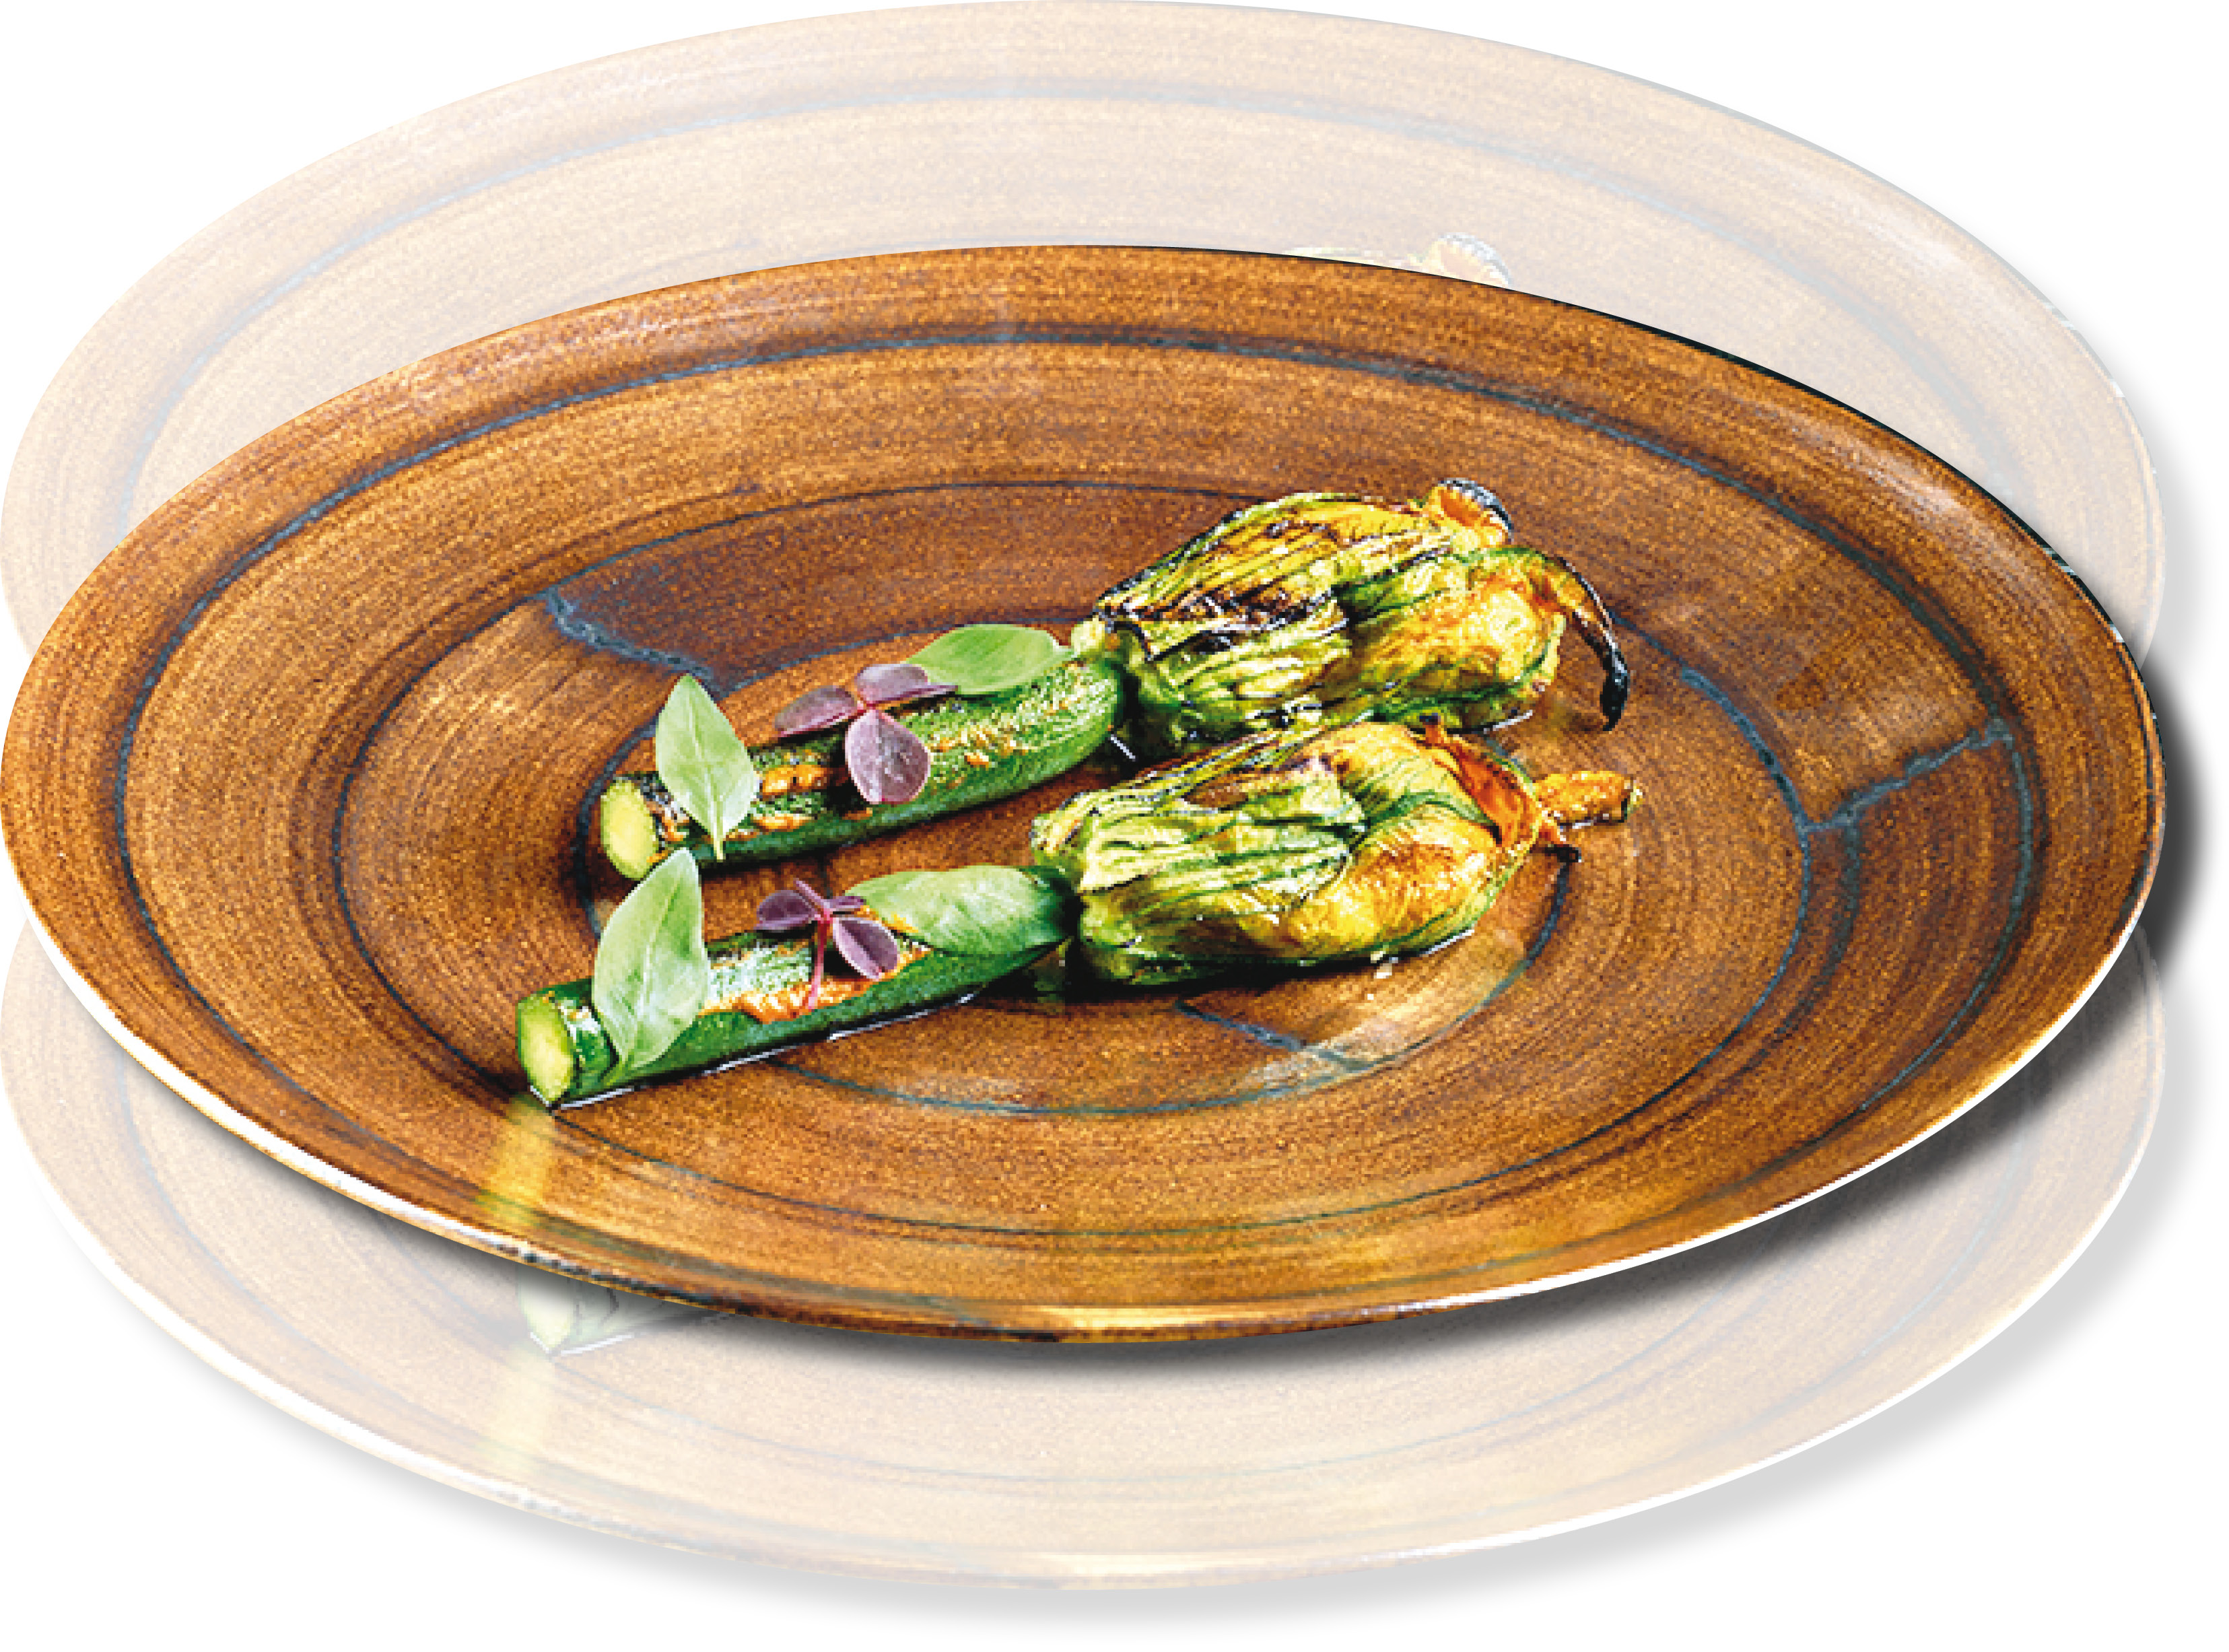 Stuffed courgette flowers (stuffed with creamy cottage cheese and finished with spiced tomato relish), are a Revolver speciality